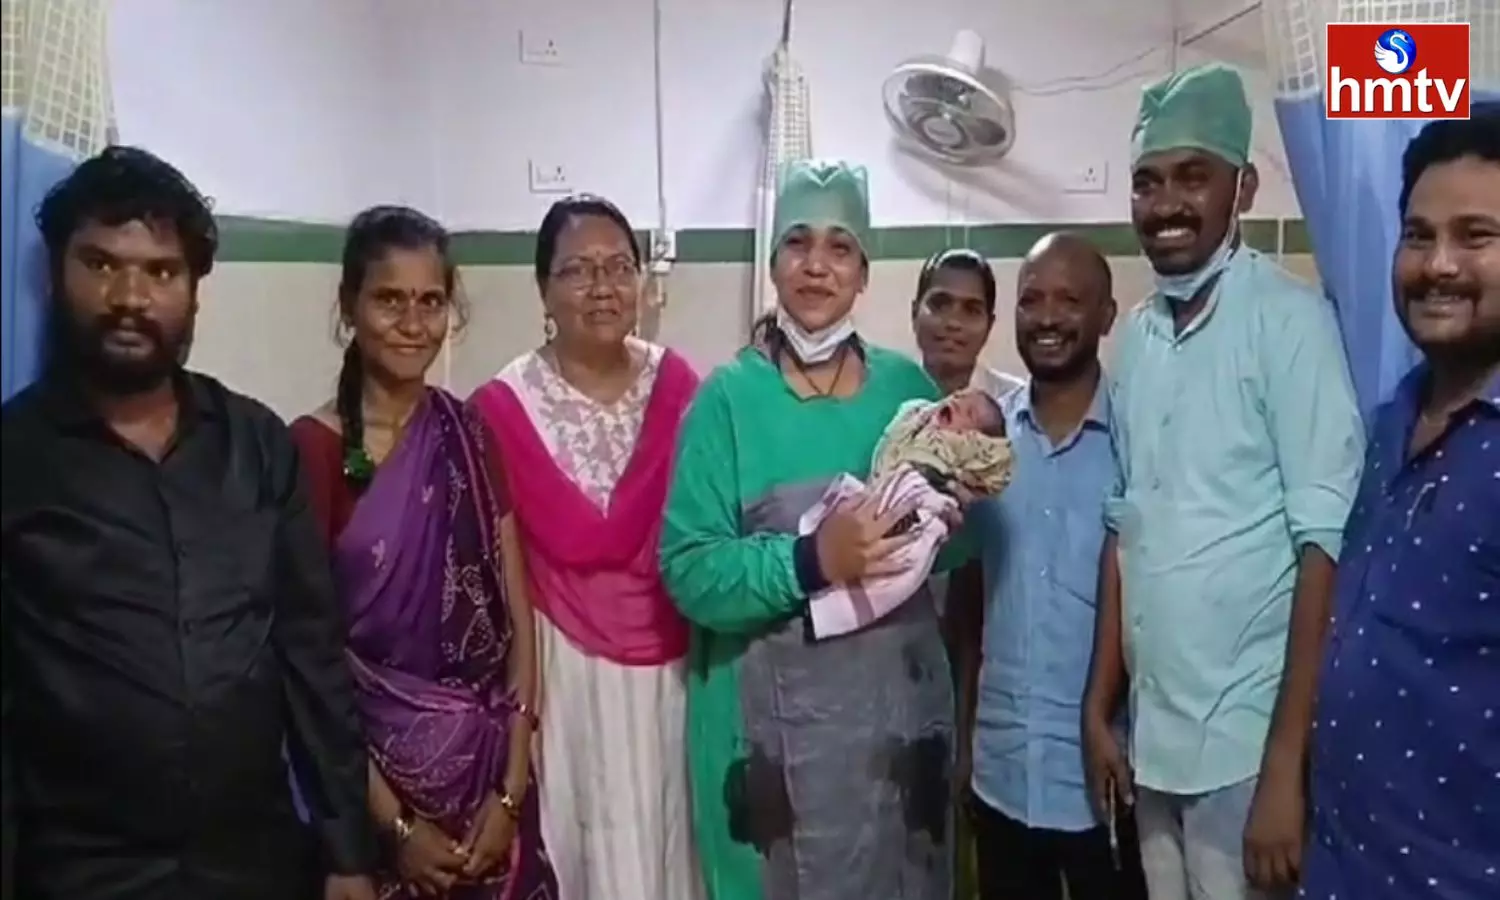 A TDP candidate who treated a pregnant woman and showed generosity